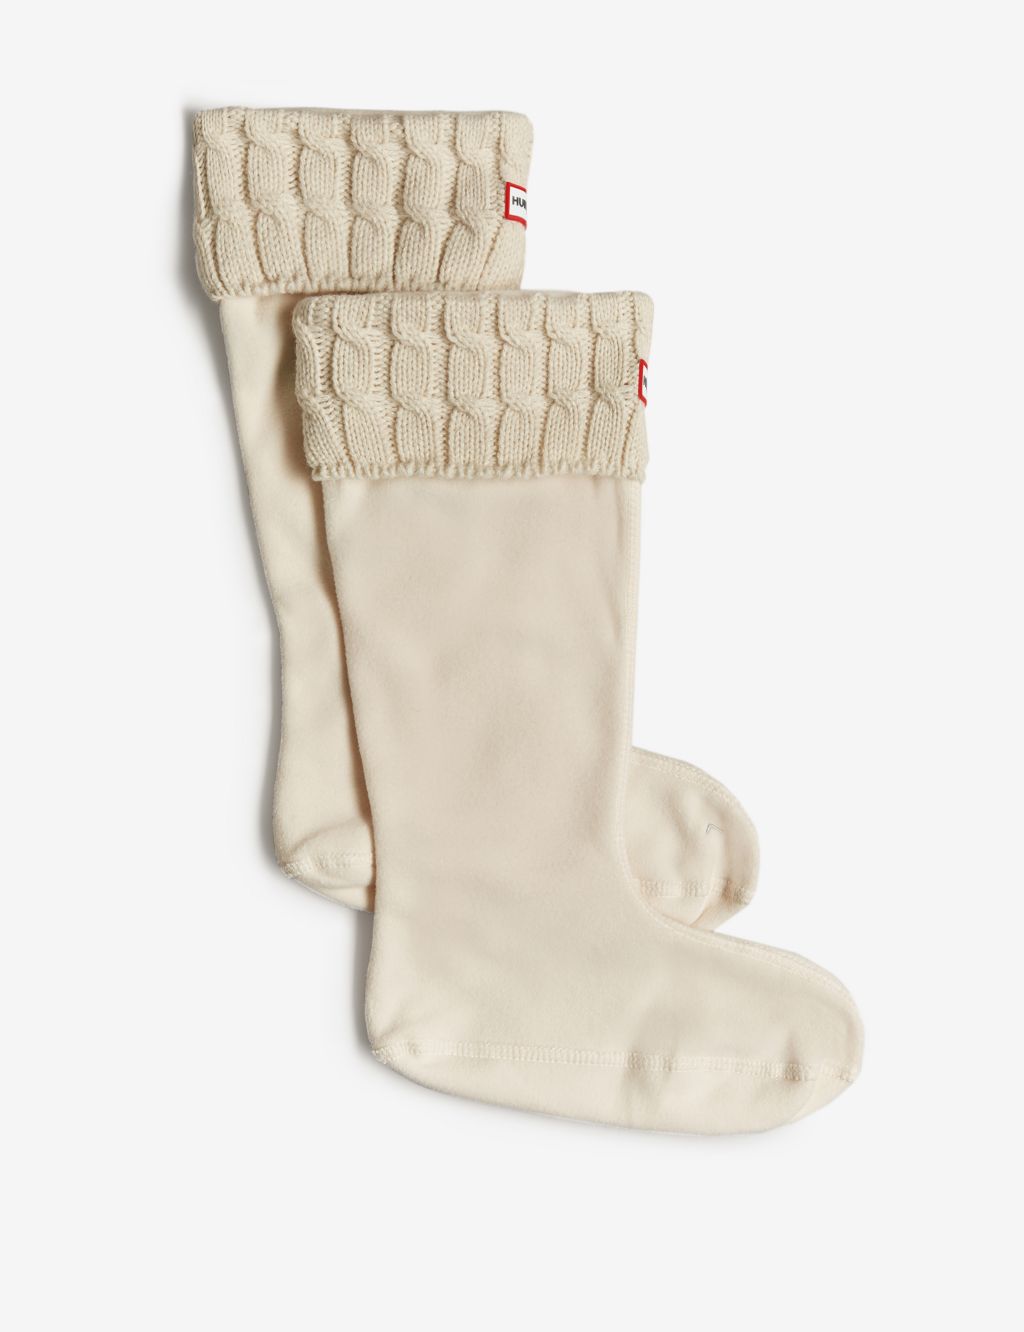 Cable Knit Boot Socks image 1